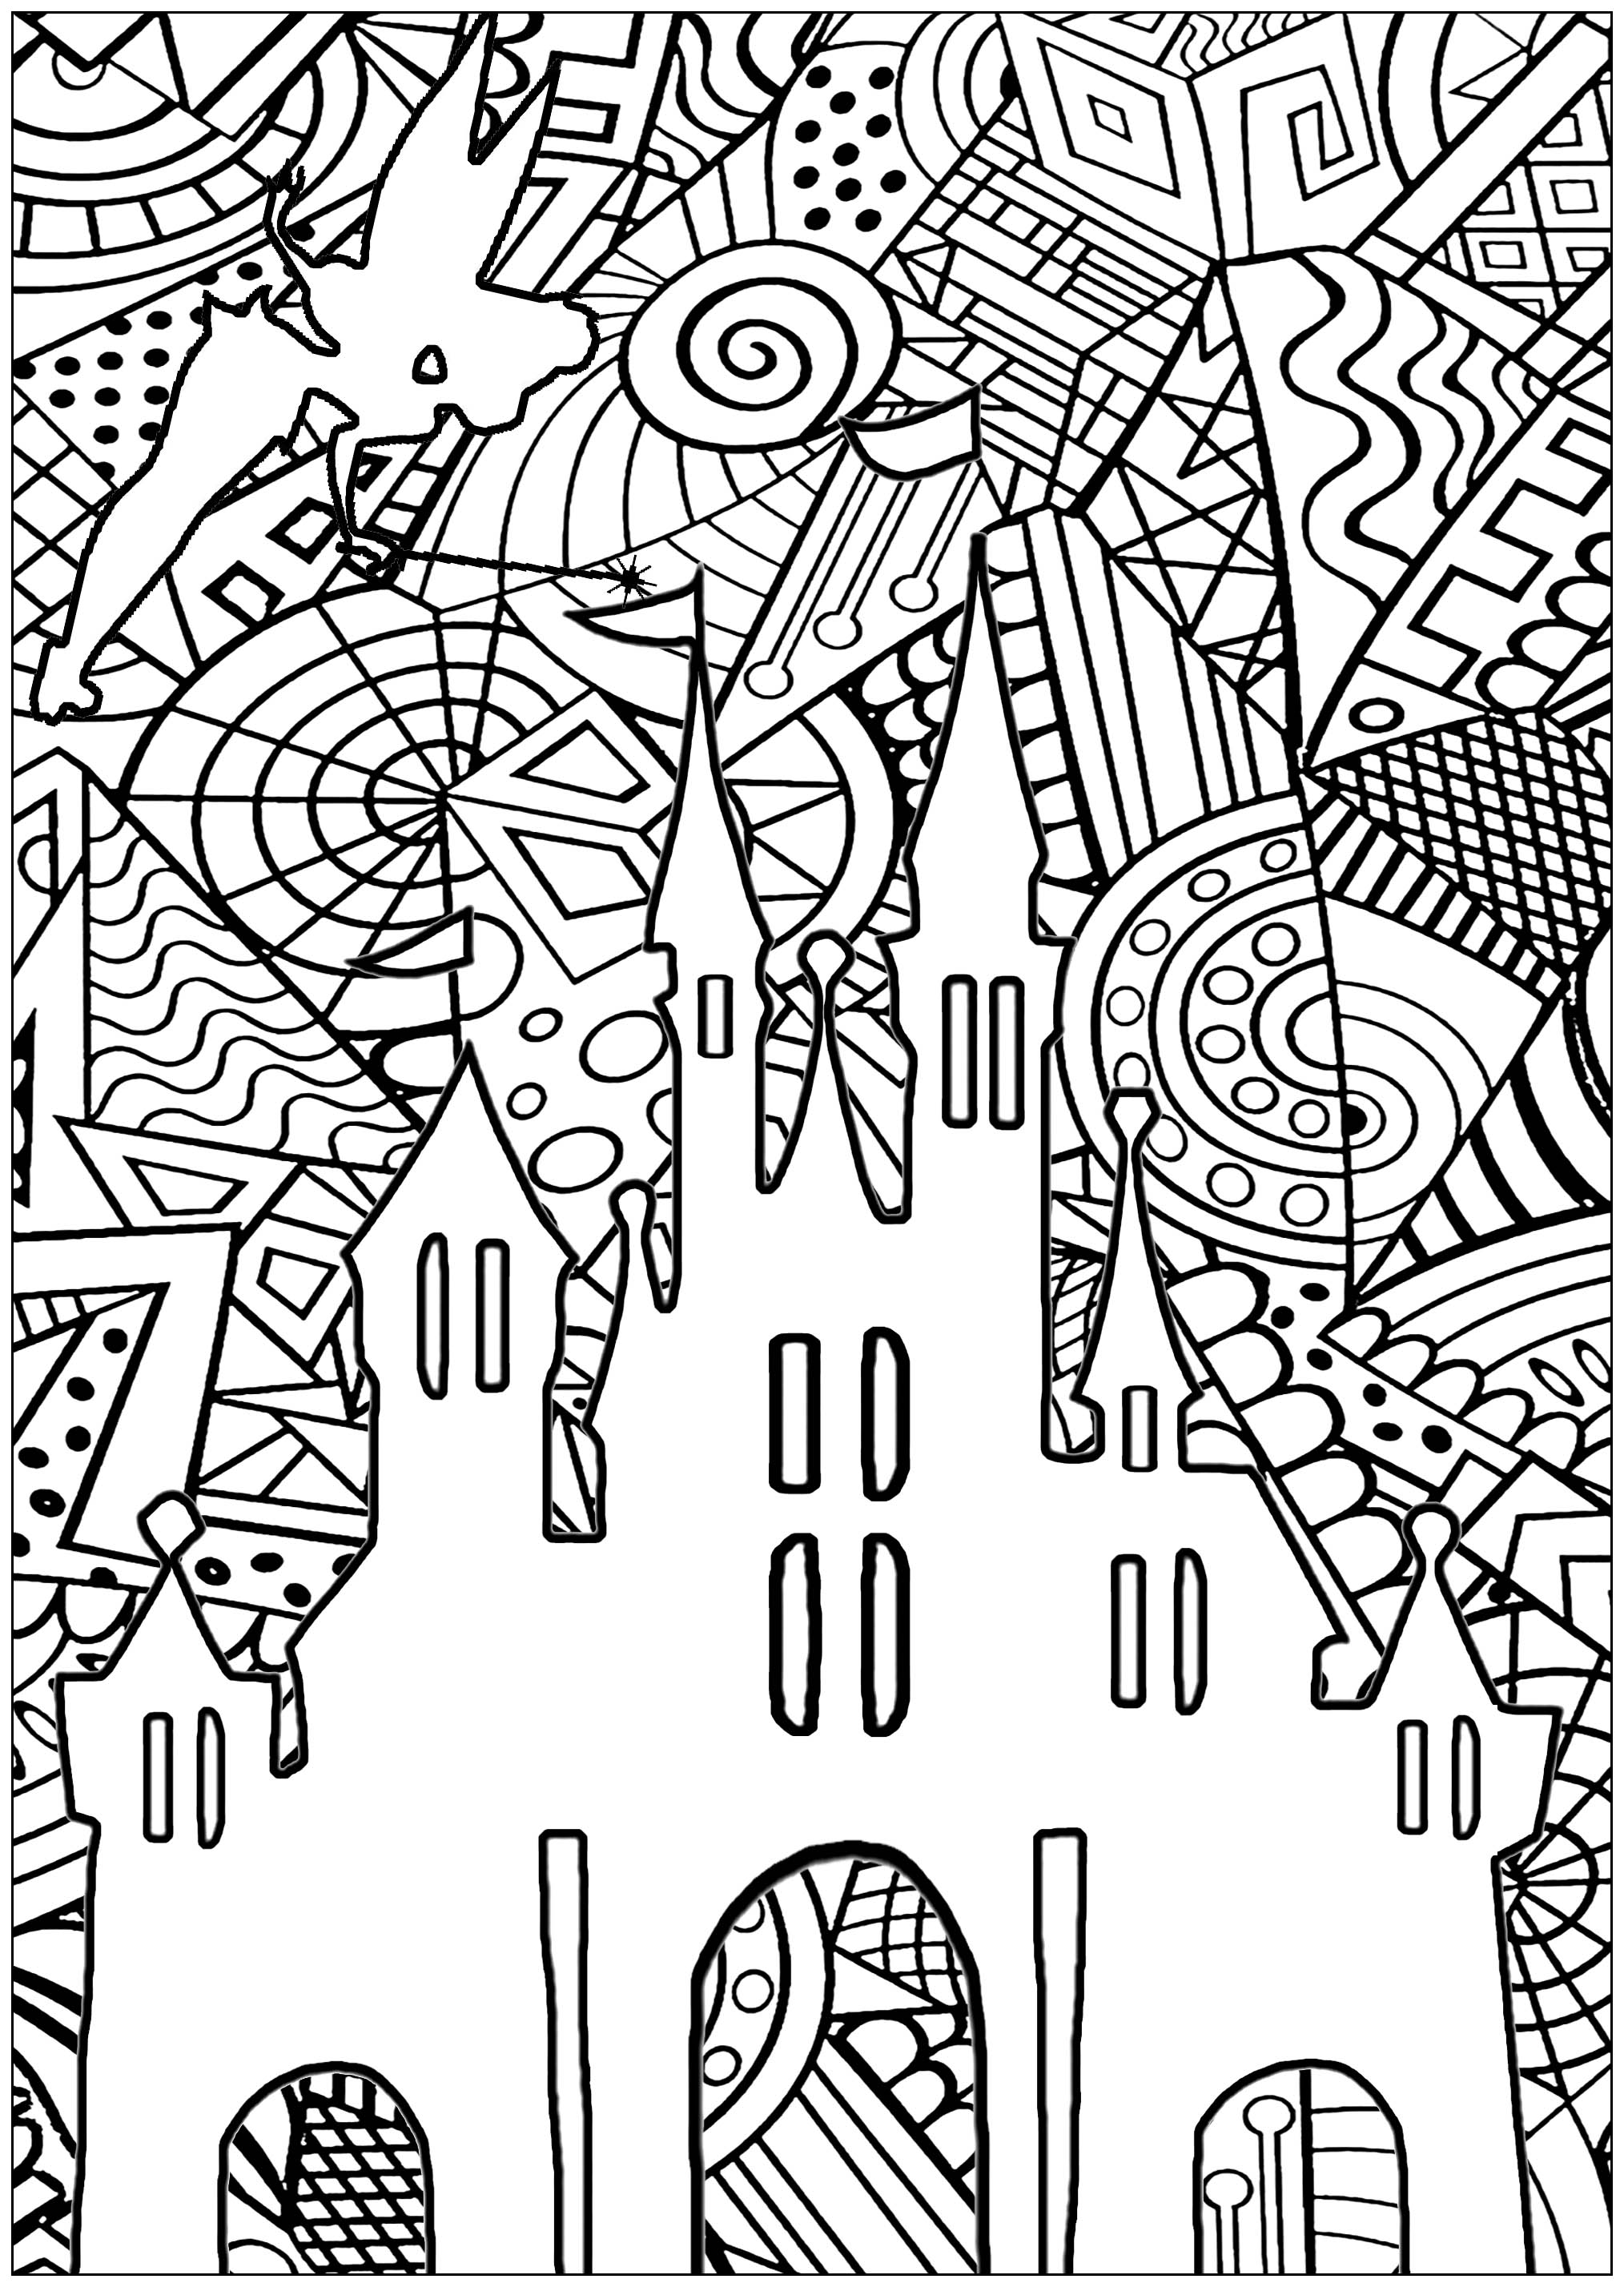 Download Castle - Coloring Pages for Adults